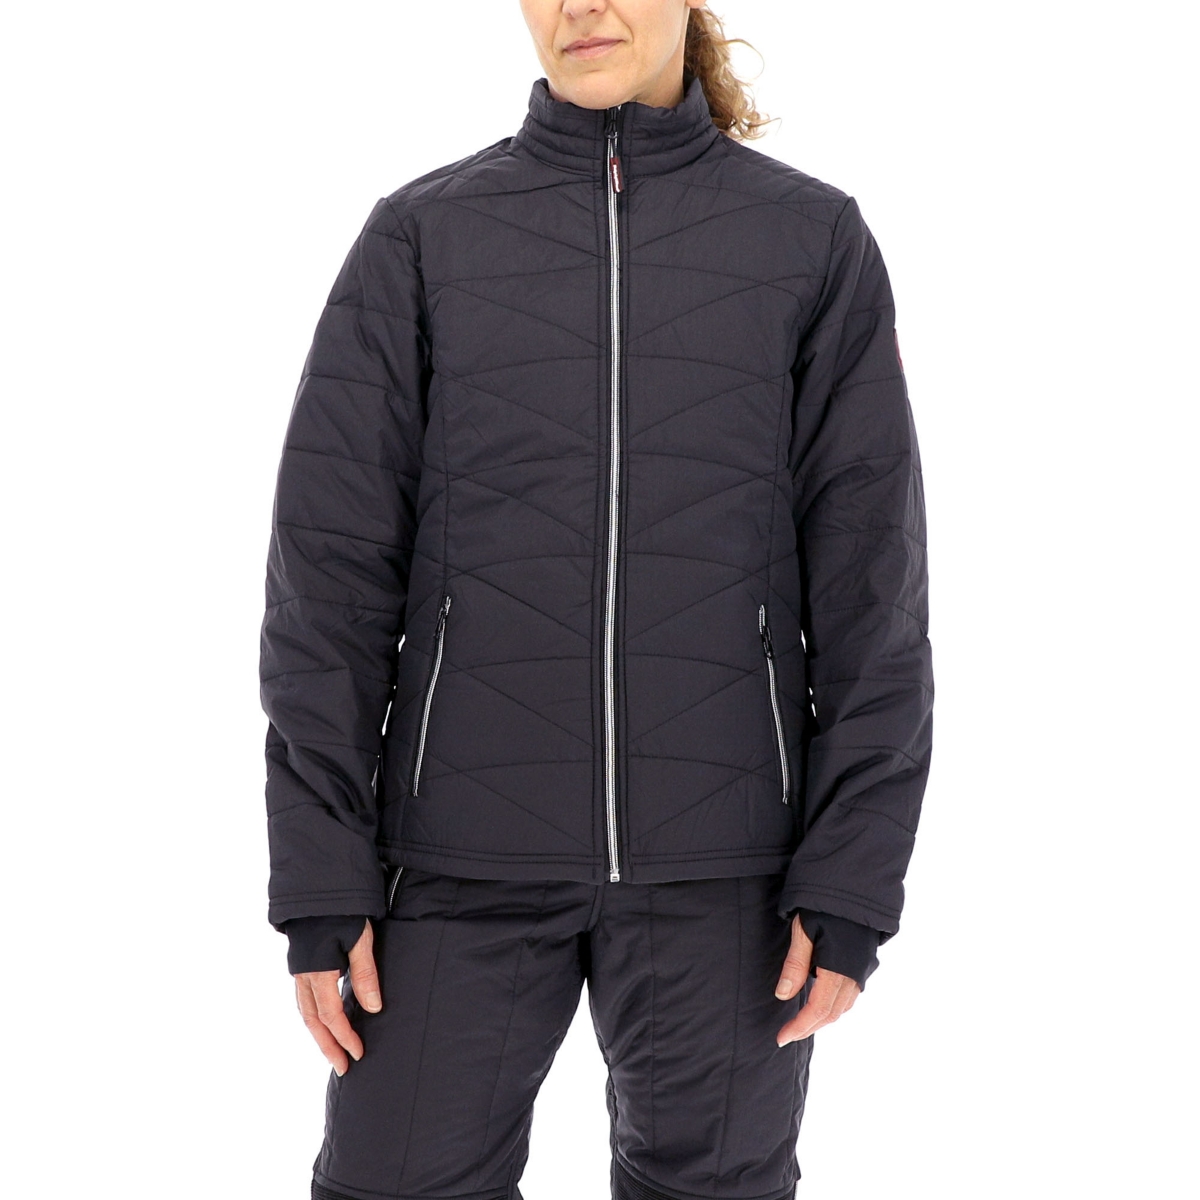 Plus Size Warm Lightweight Packable Quilted Ripstop Insulated Jacket - Black